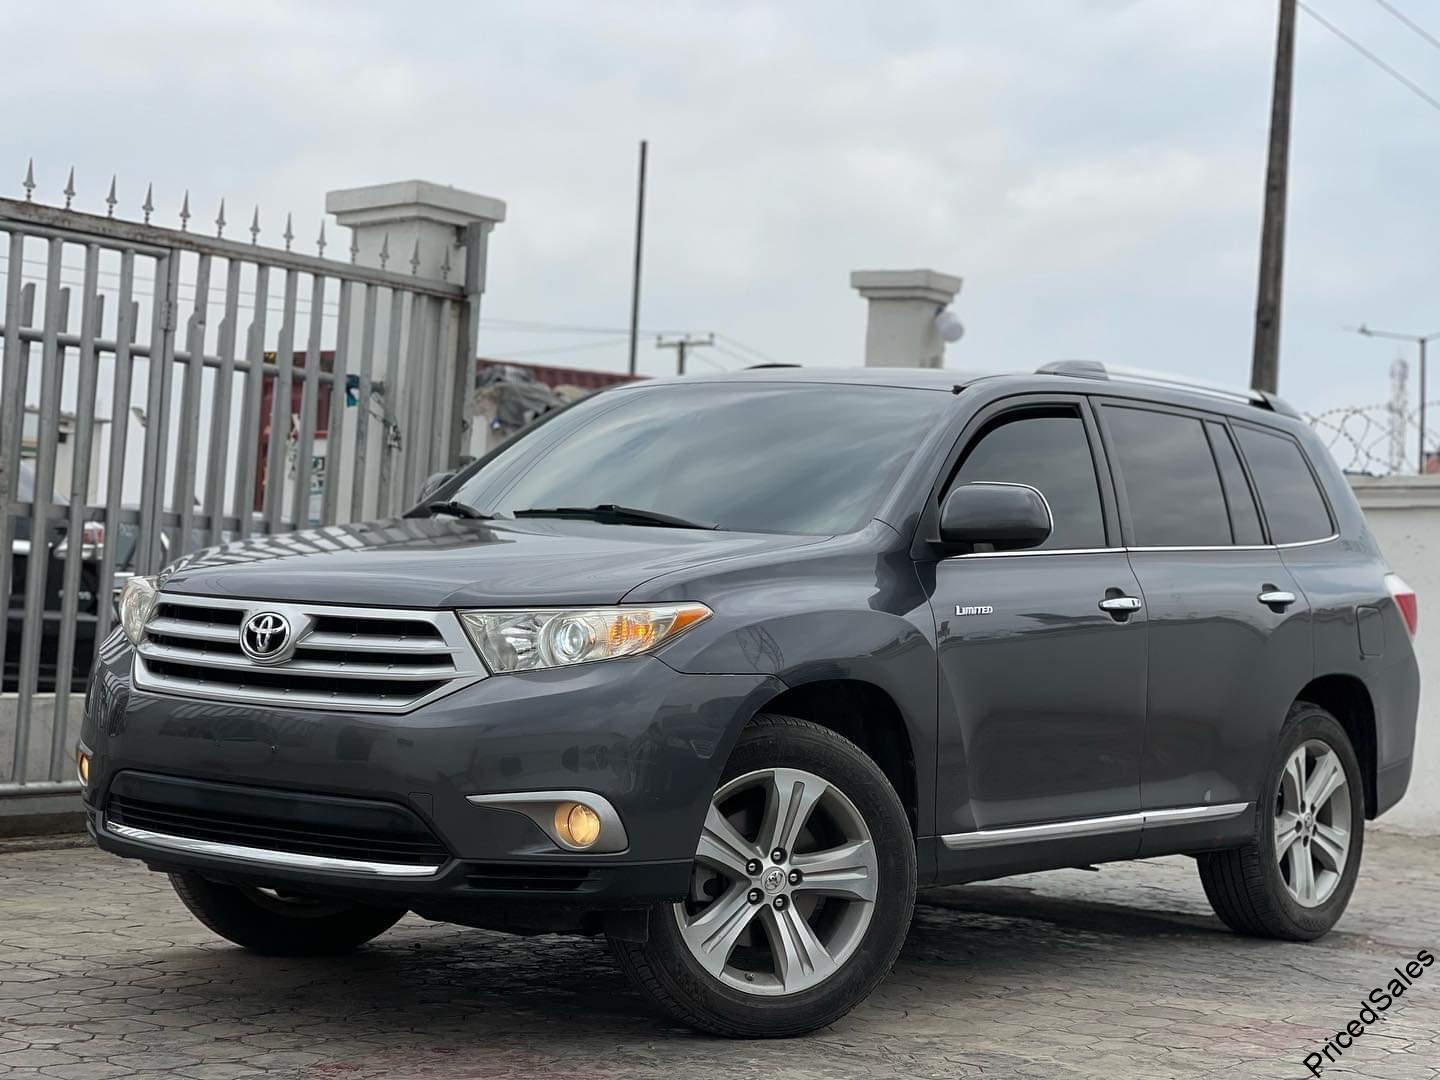 Price of Cheap Toyota Highlander for sale in Nigeria 2023